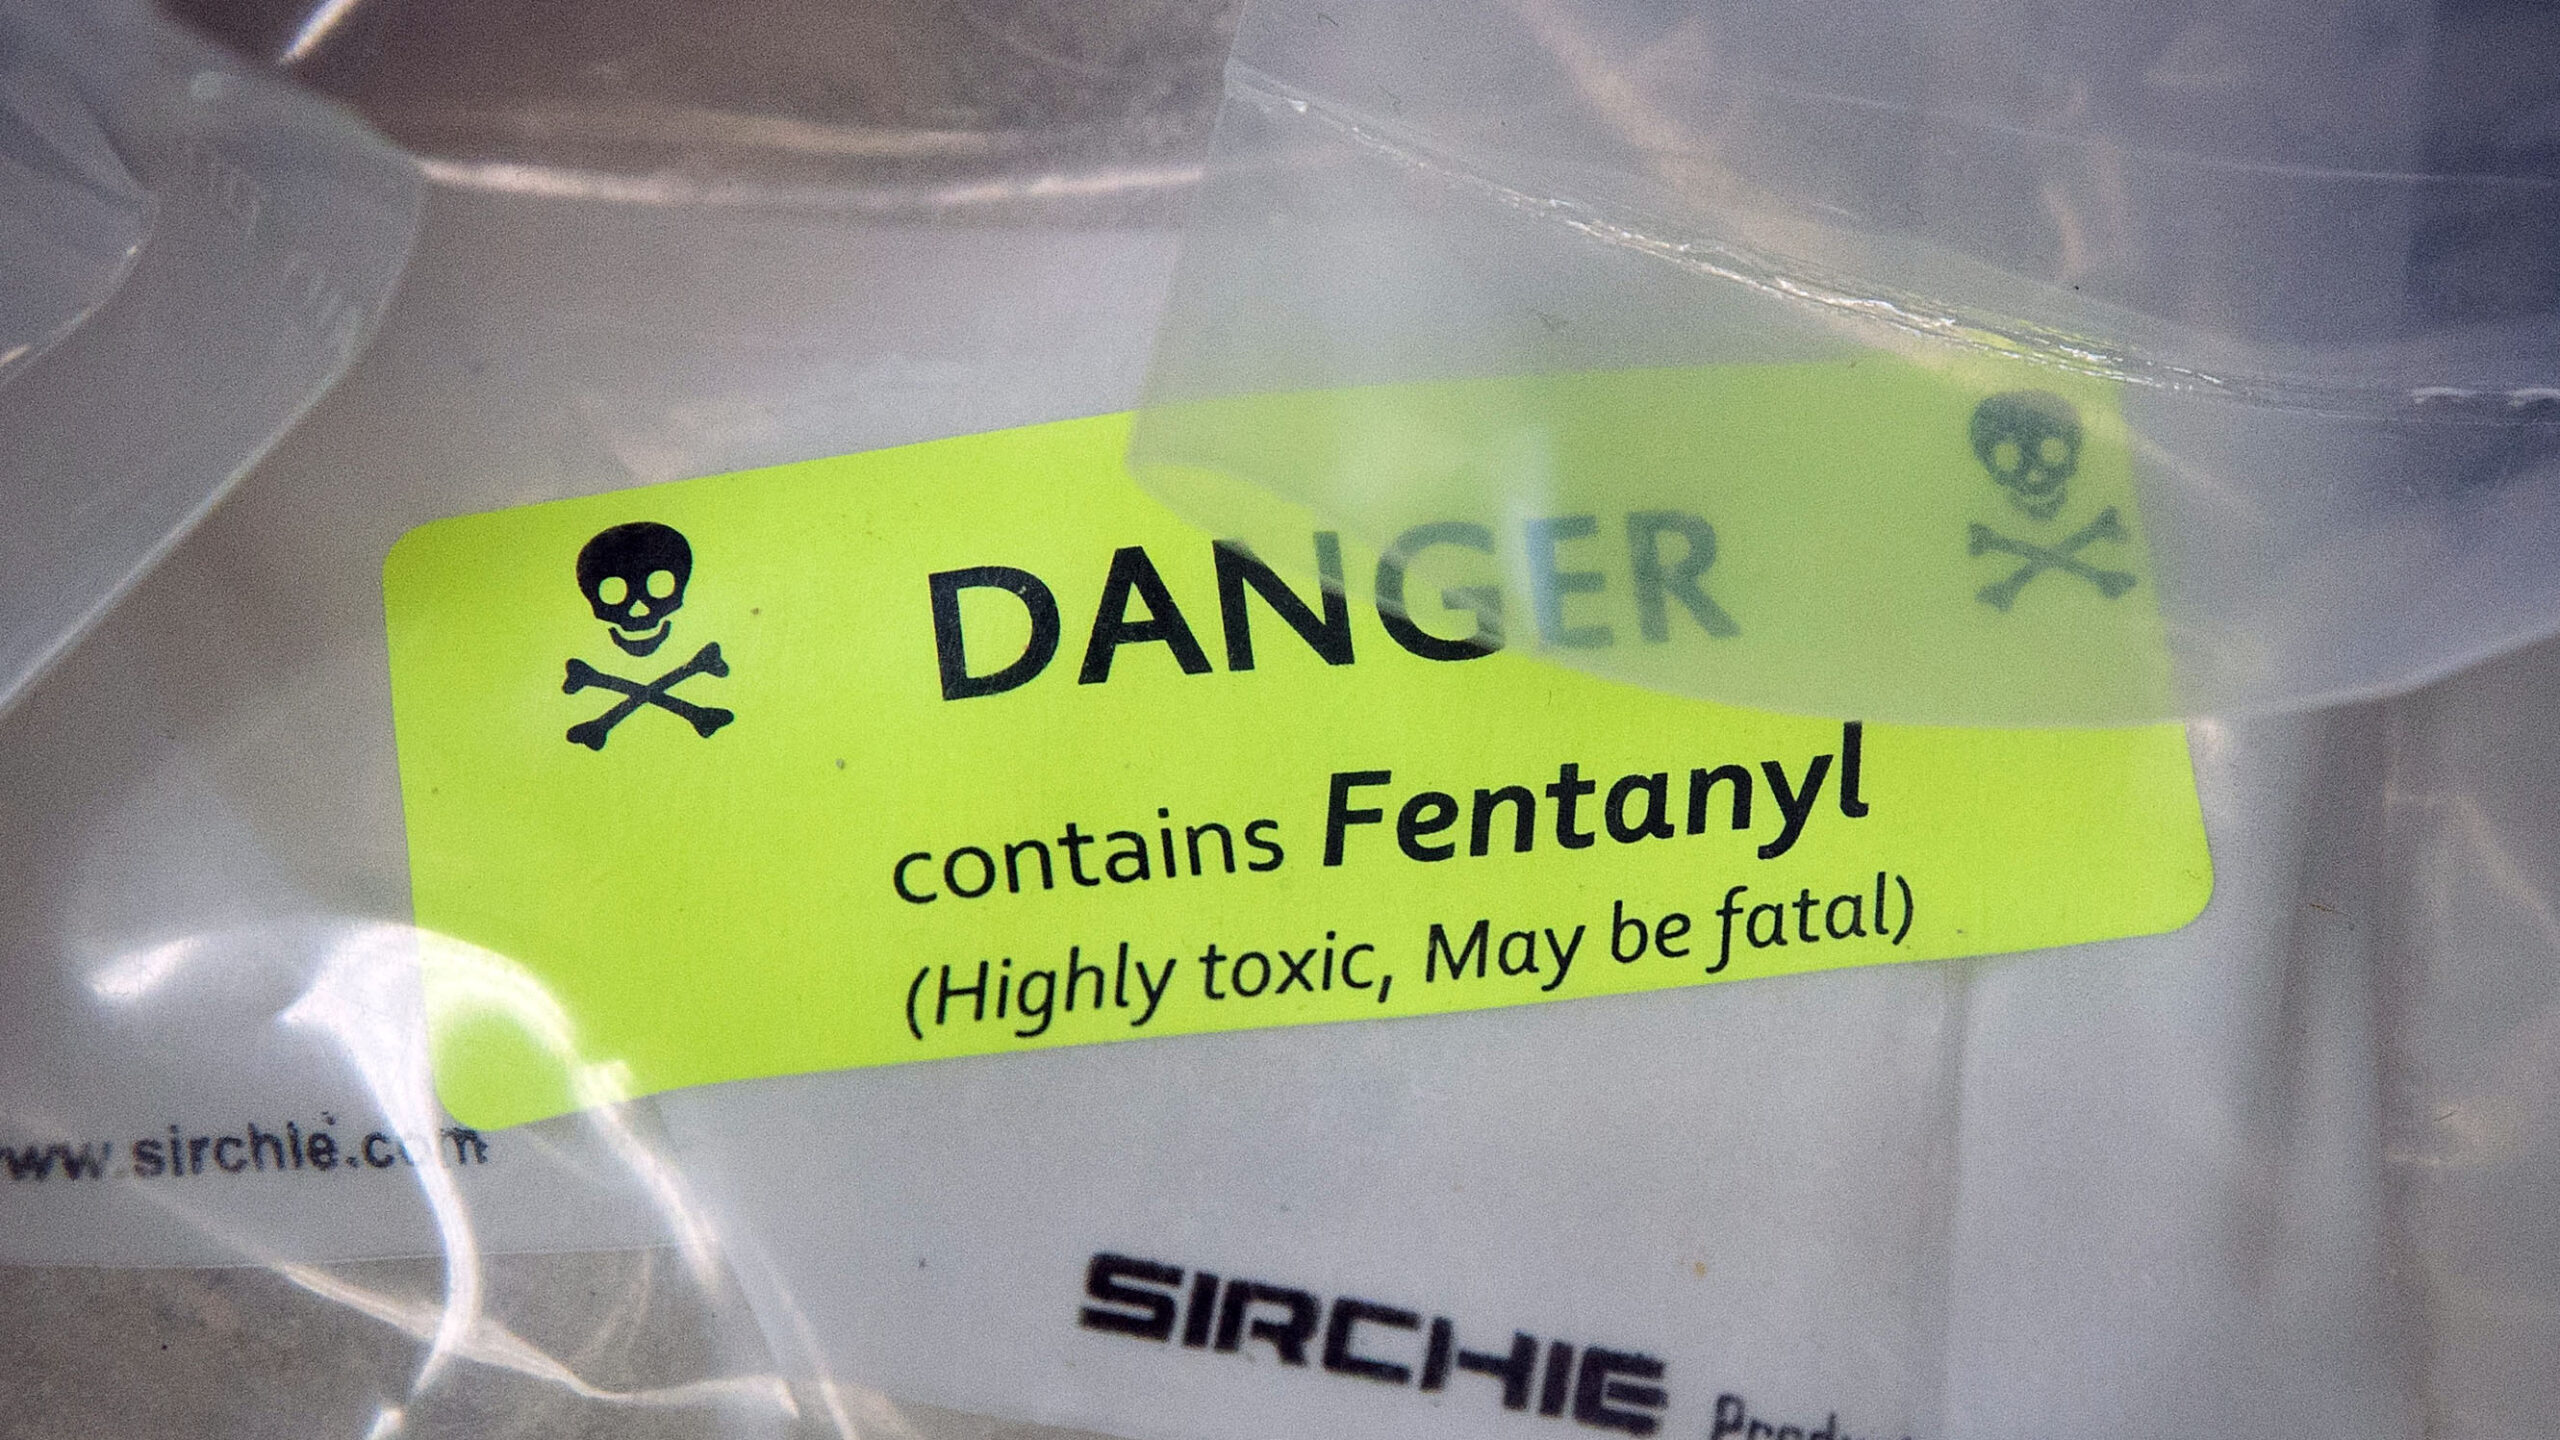 Major Mexican Drug Cartel Claims Its Banning Production Of Fentanyl. Experts Are Skeptical.